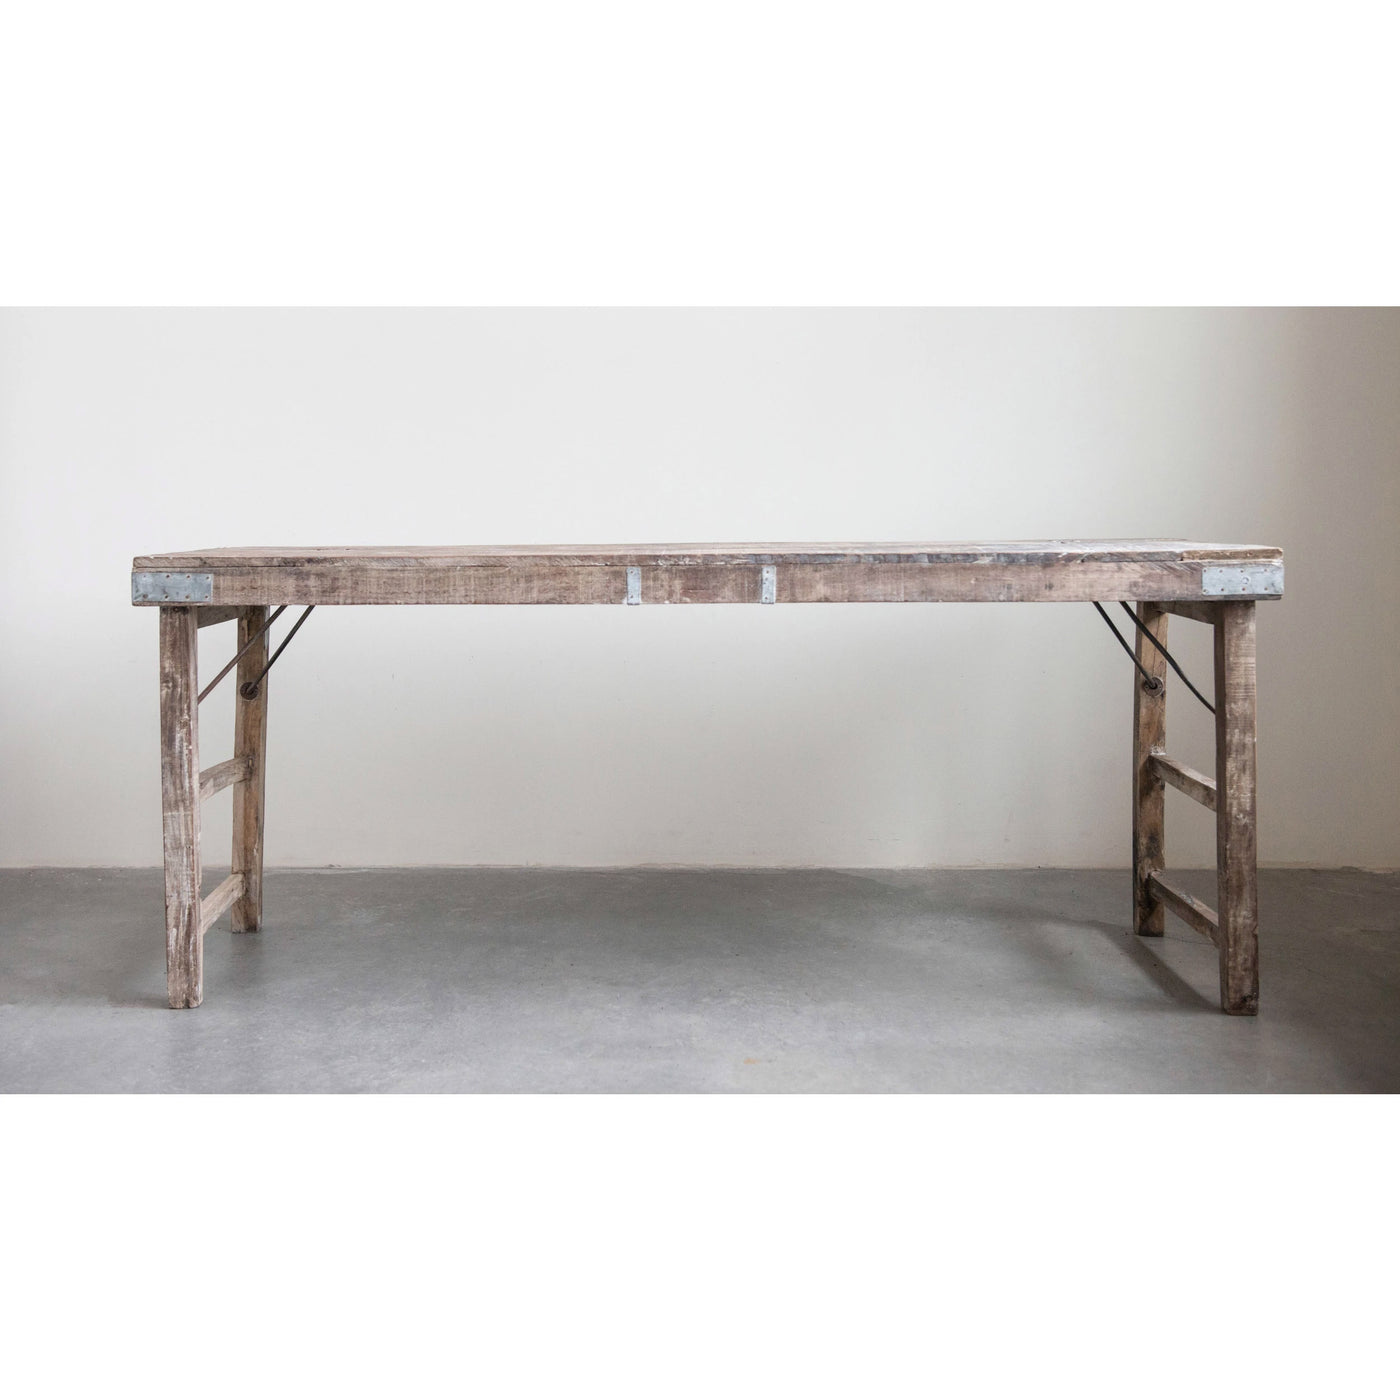 Reclaimed Wood Folding Table - Pre Order